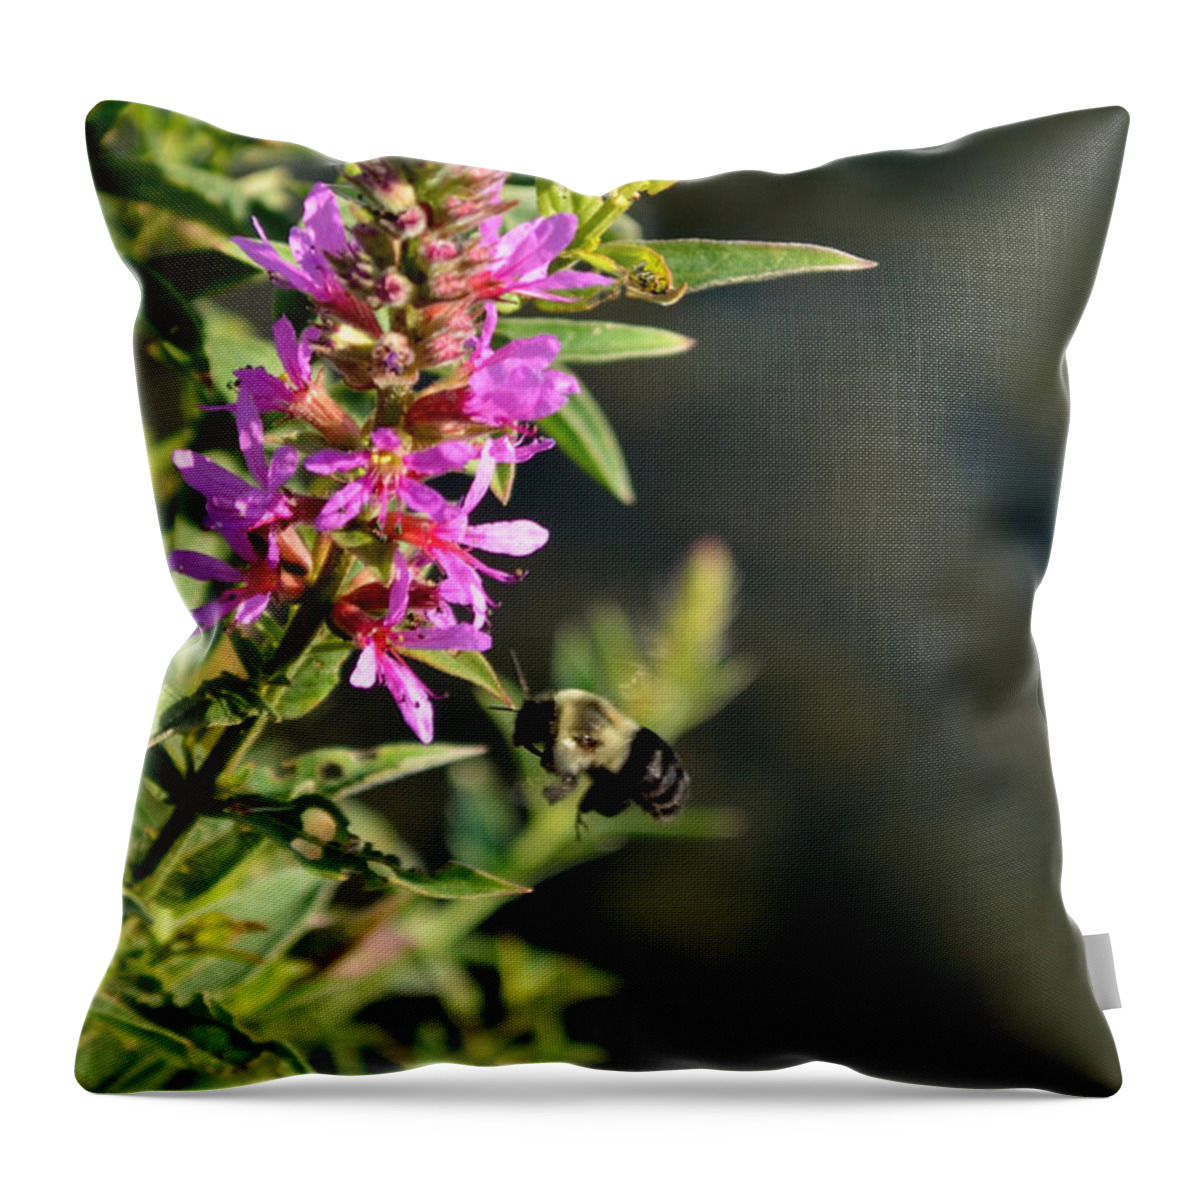 Bumble Bee Throw Pillow featuring the photograph Gathering Pollen by Deborah Ritch